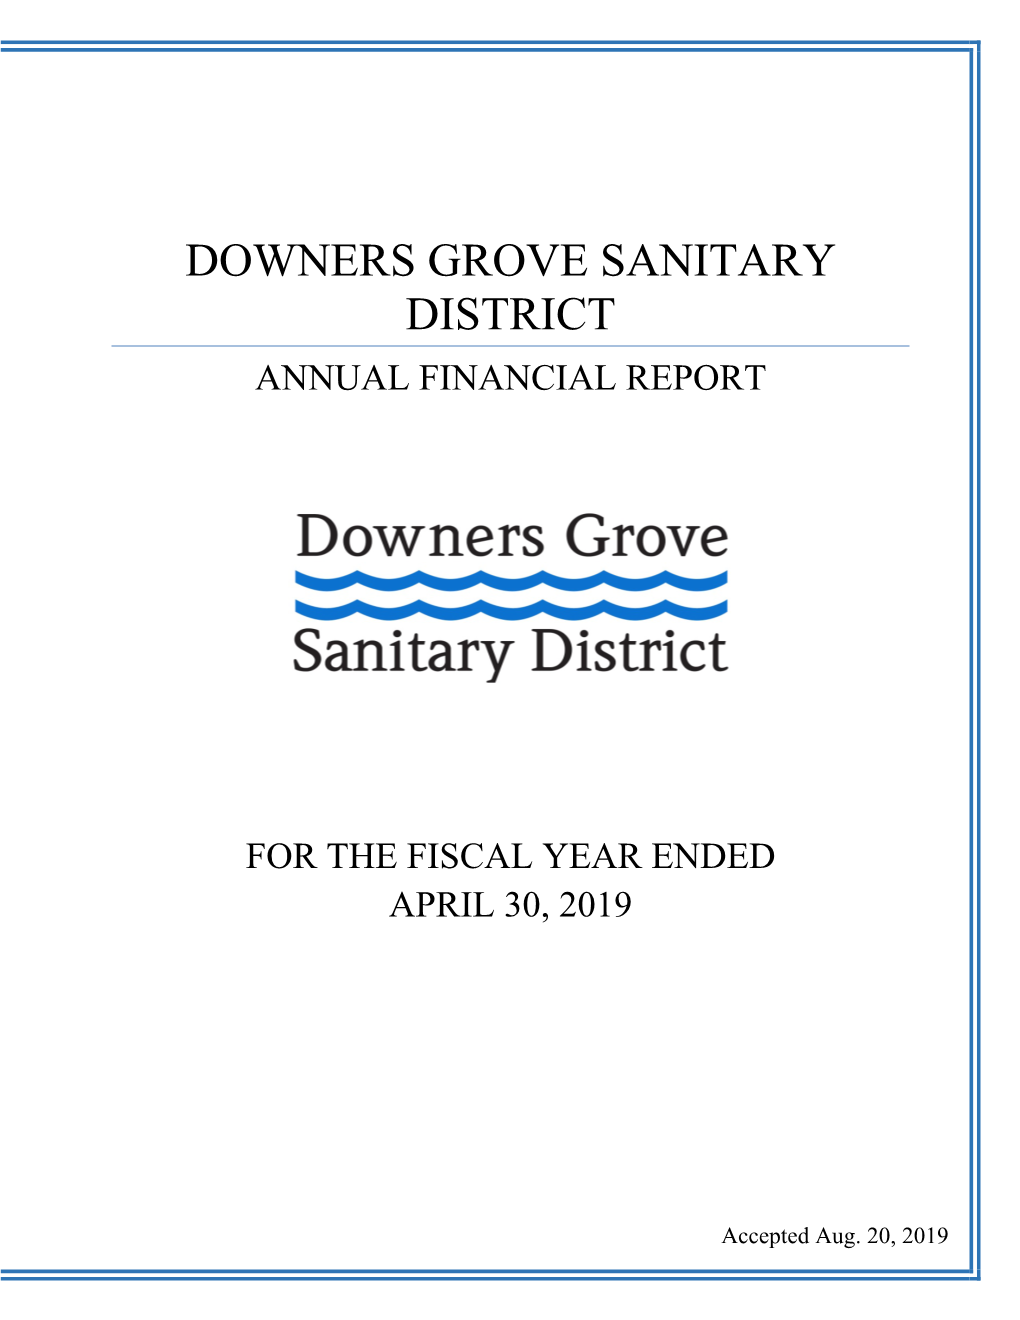 Annual Financial Report for the Fiscal Year Ended April 30, 2019